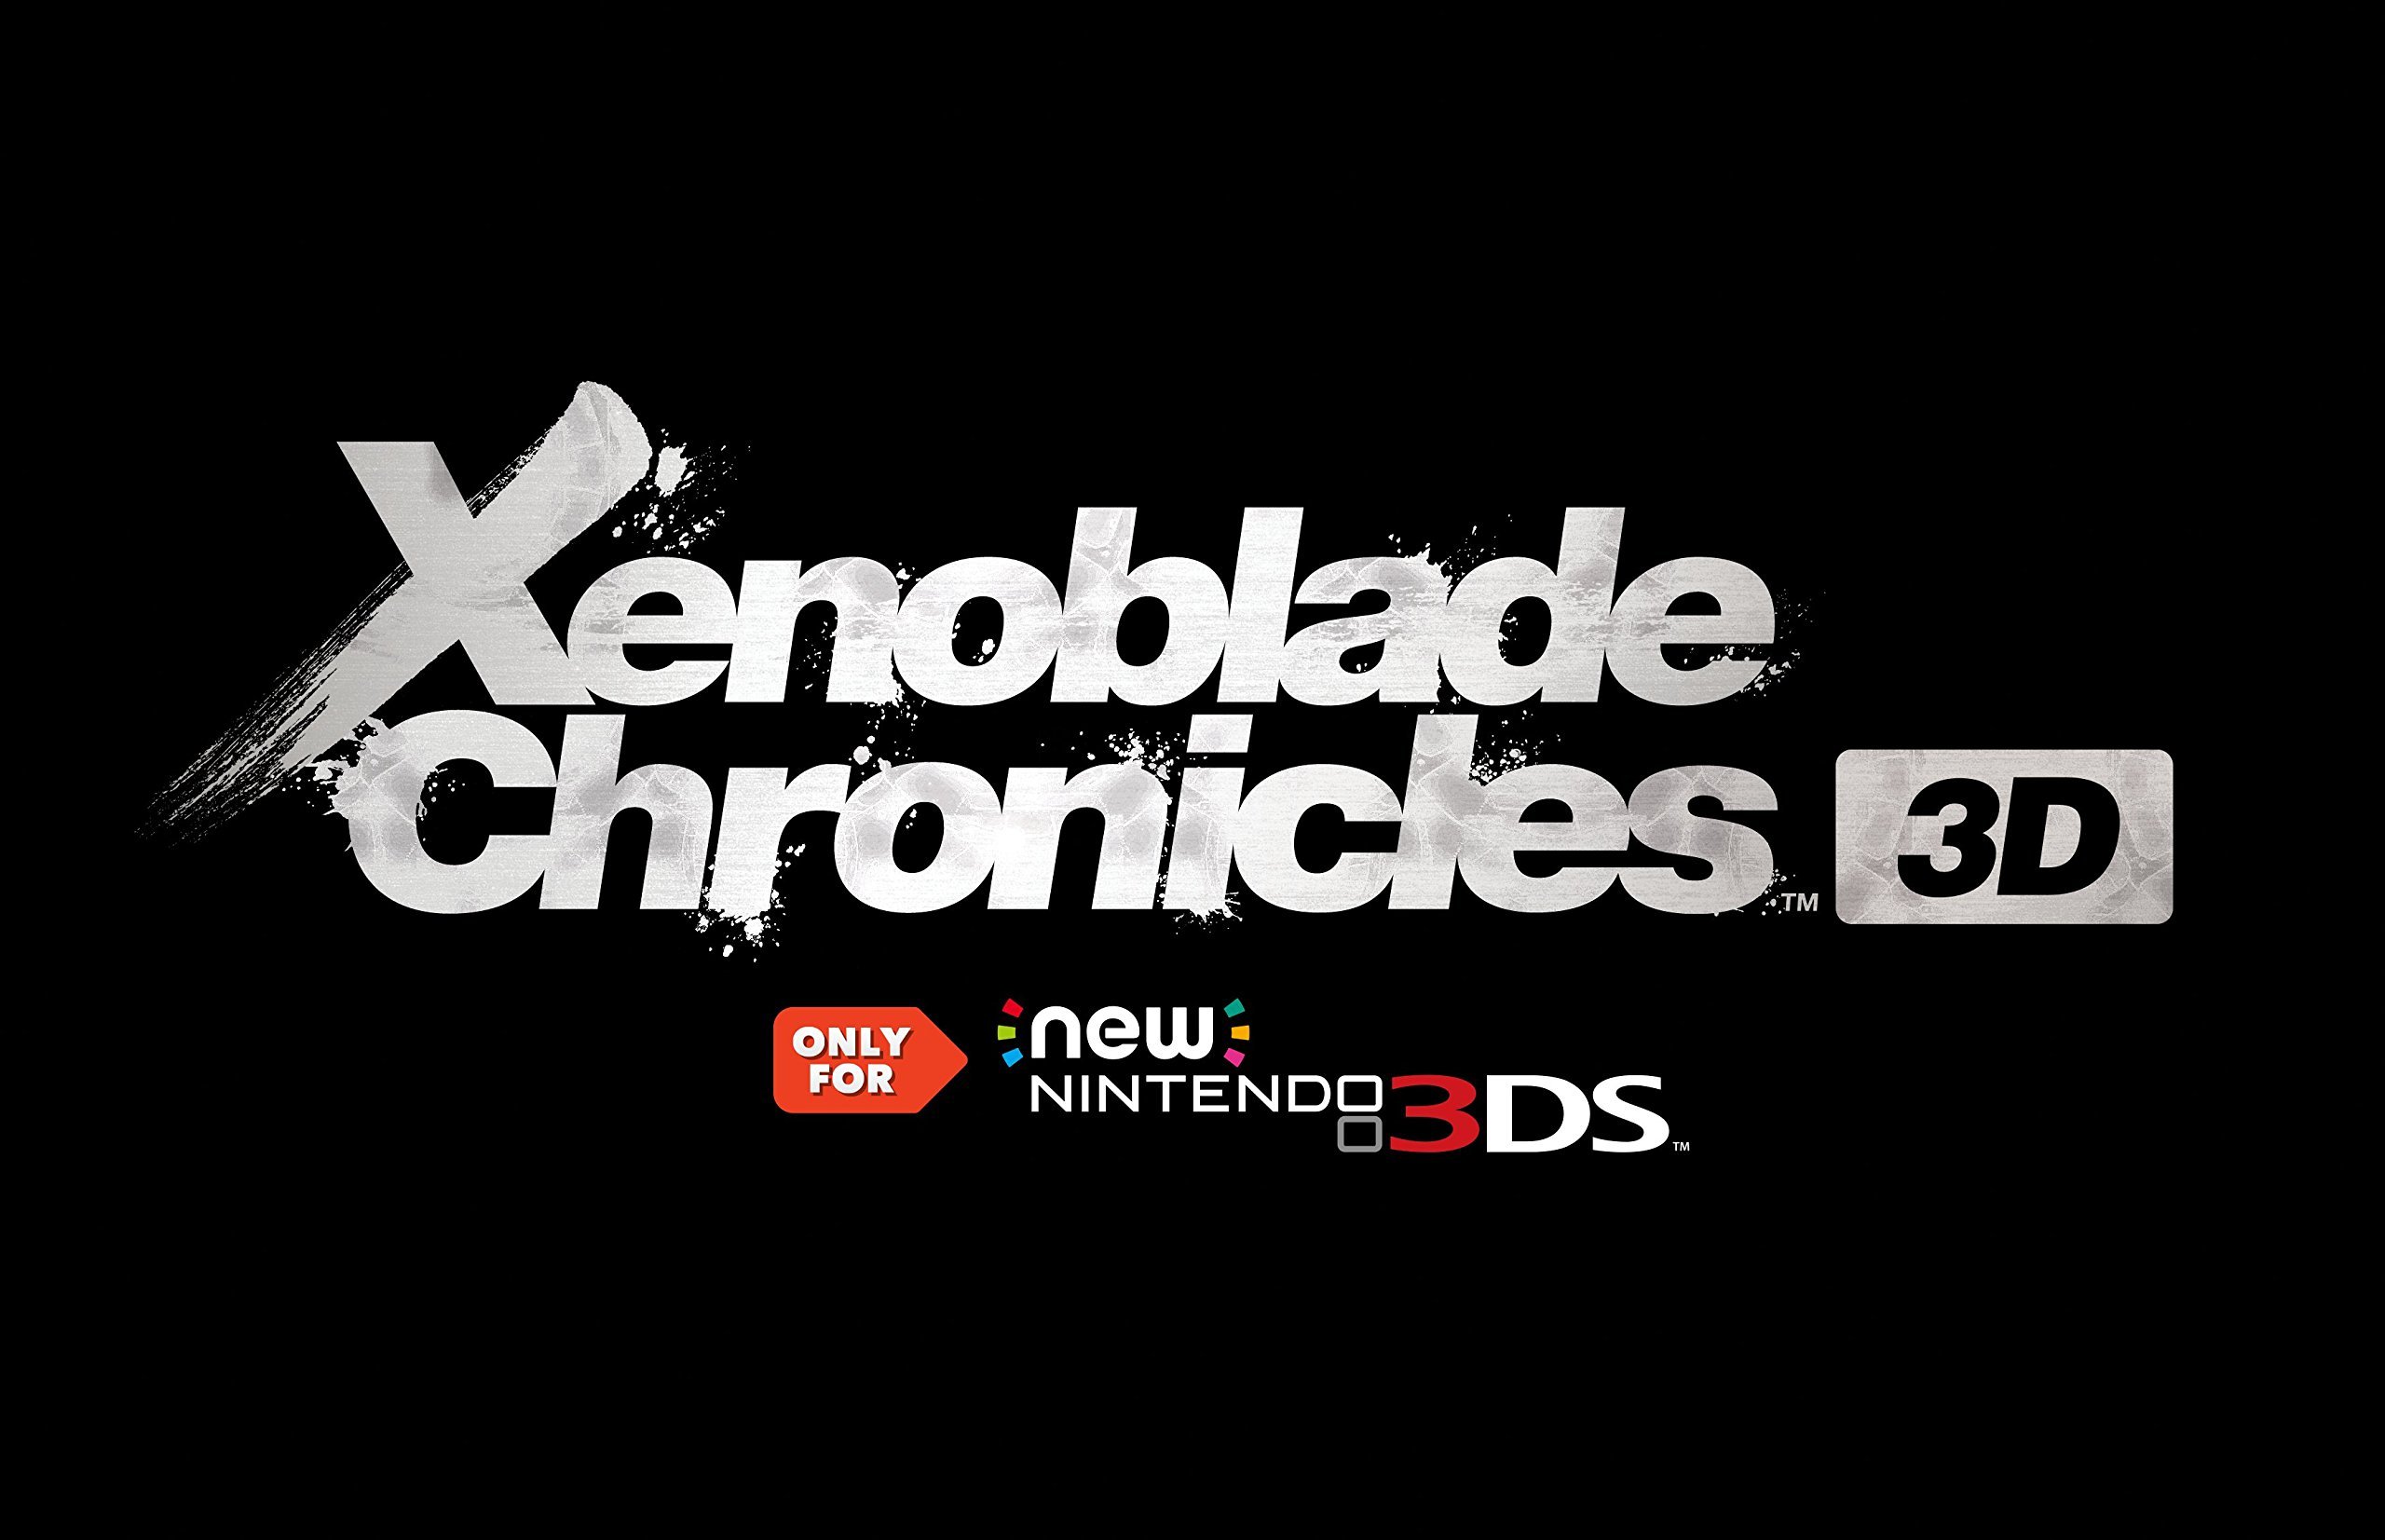 Xenoblade Chronicles 3D details  controls, Collection Mode